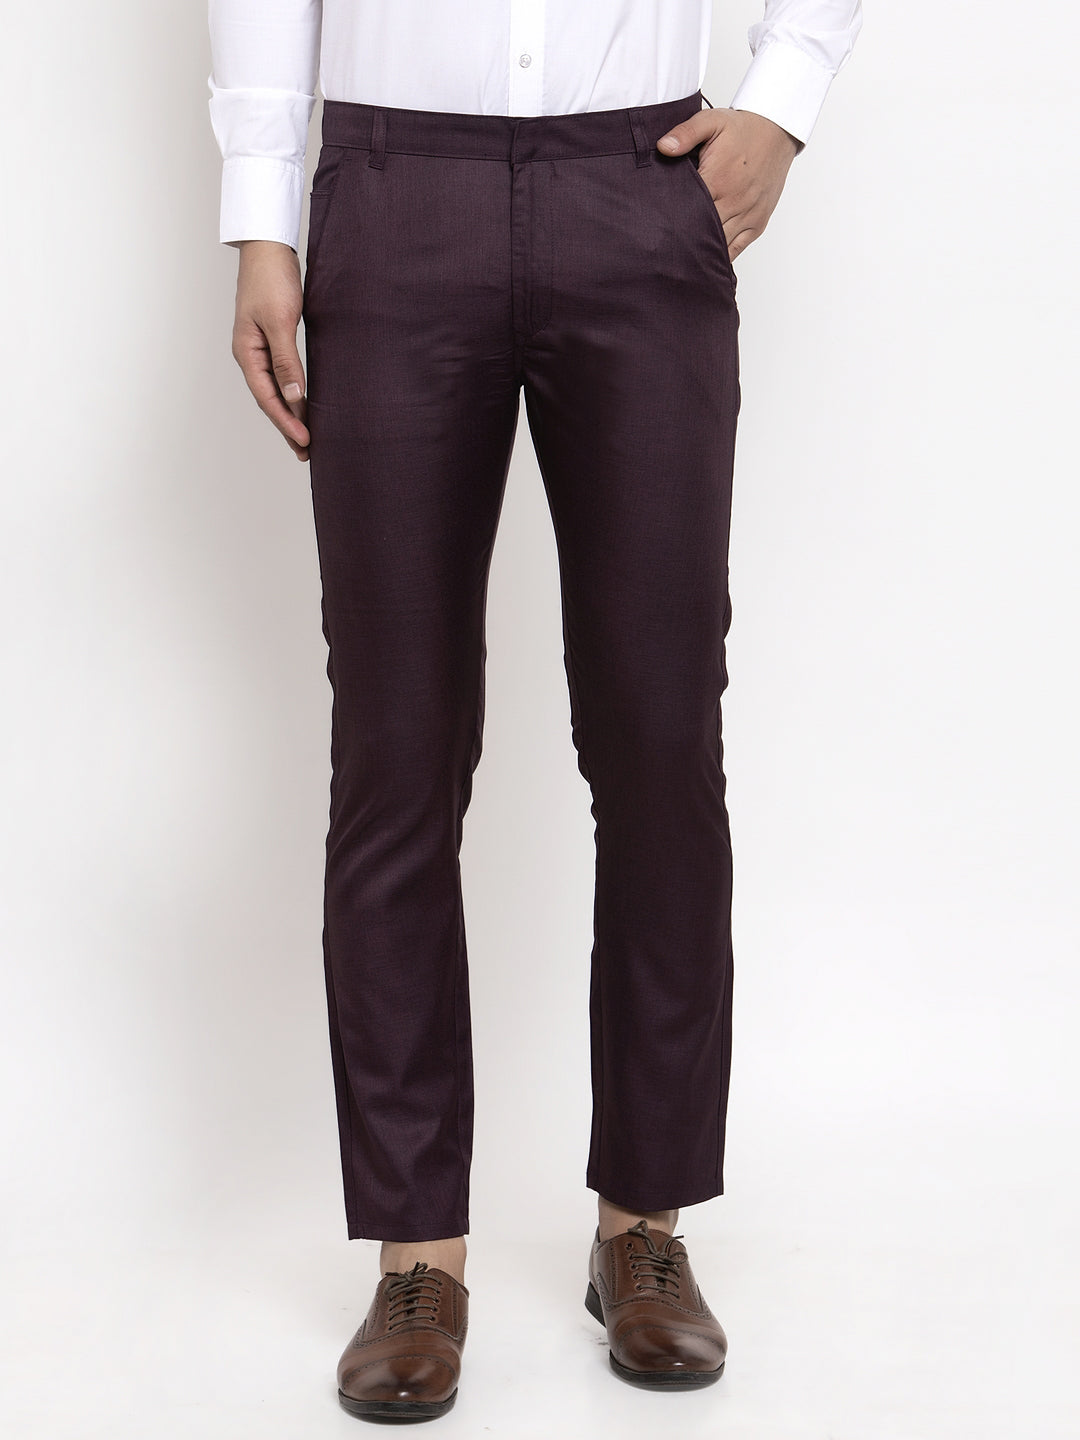 Cotton Trouser for Men in Ahmedabad at best price by Omkar Enterprise -  Justdial